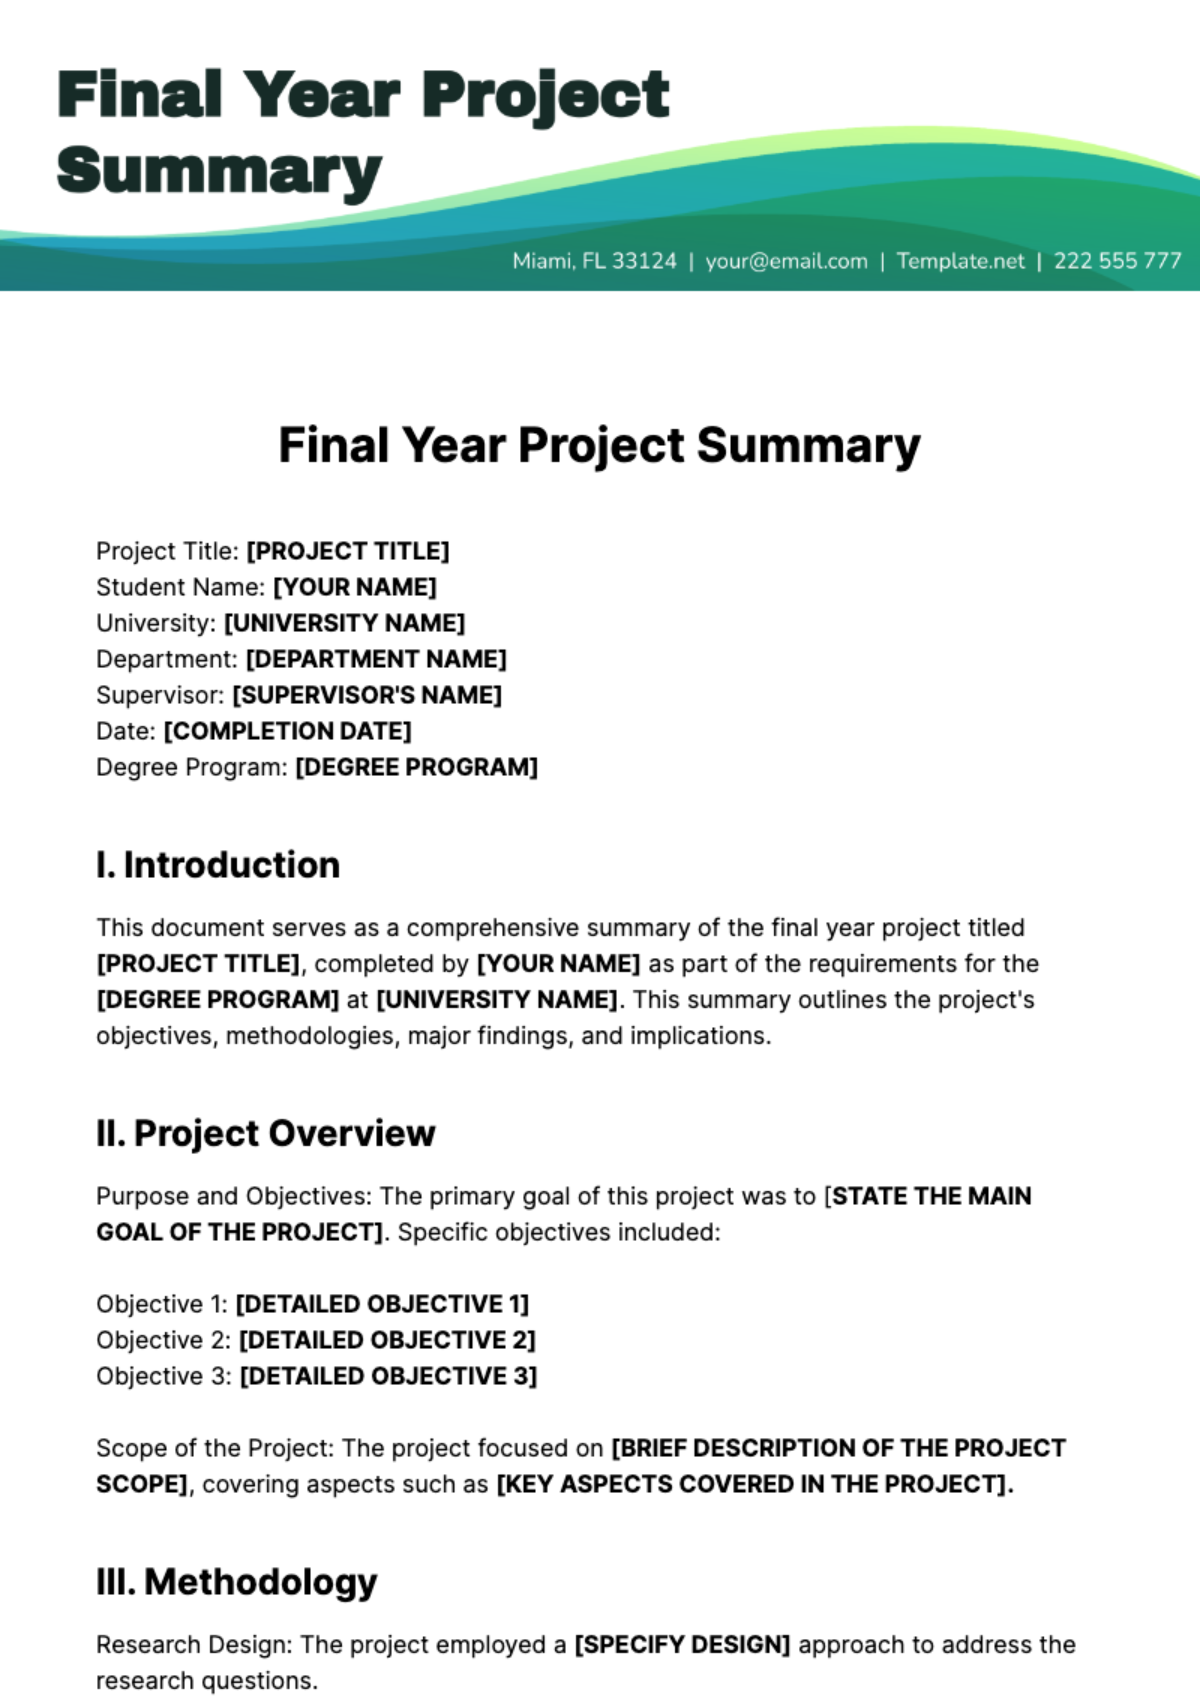 Final Year Project Summary Template